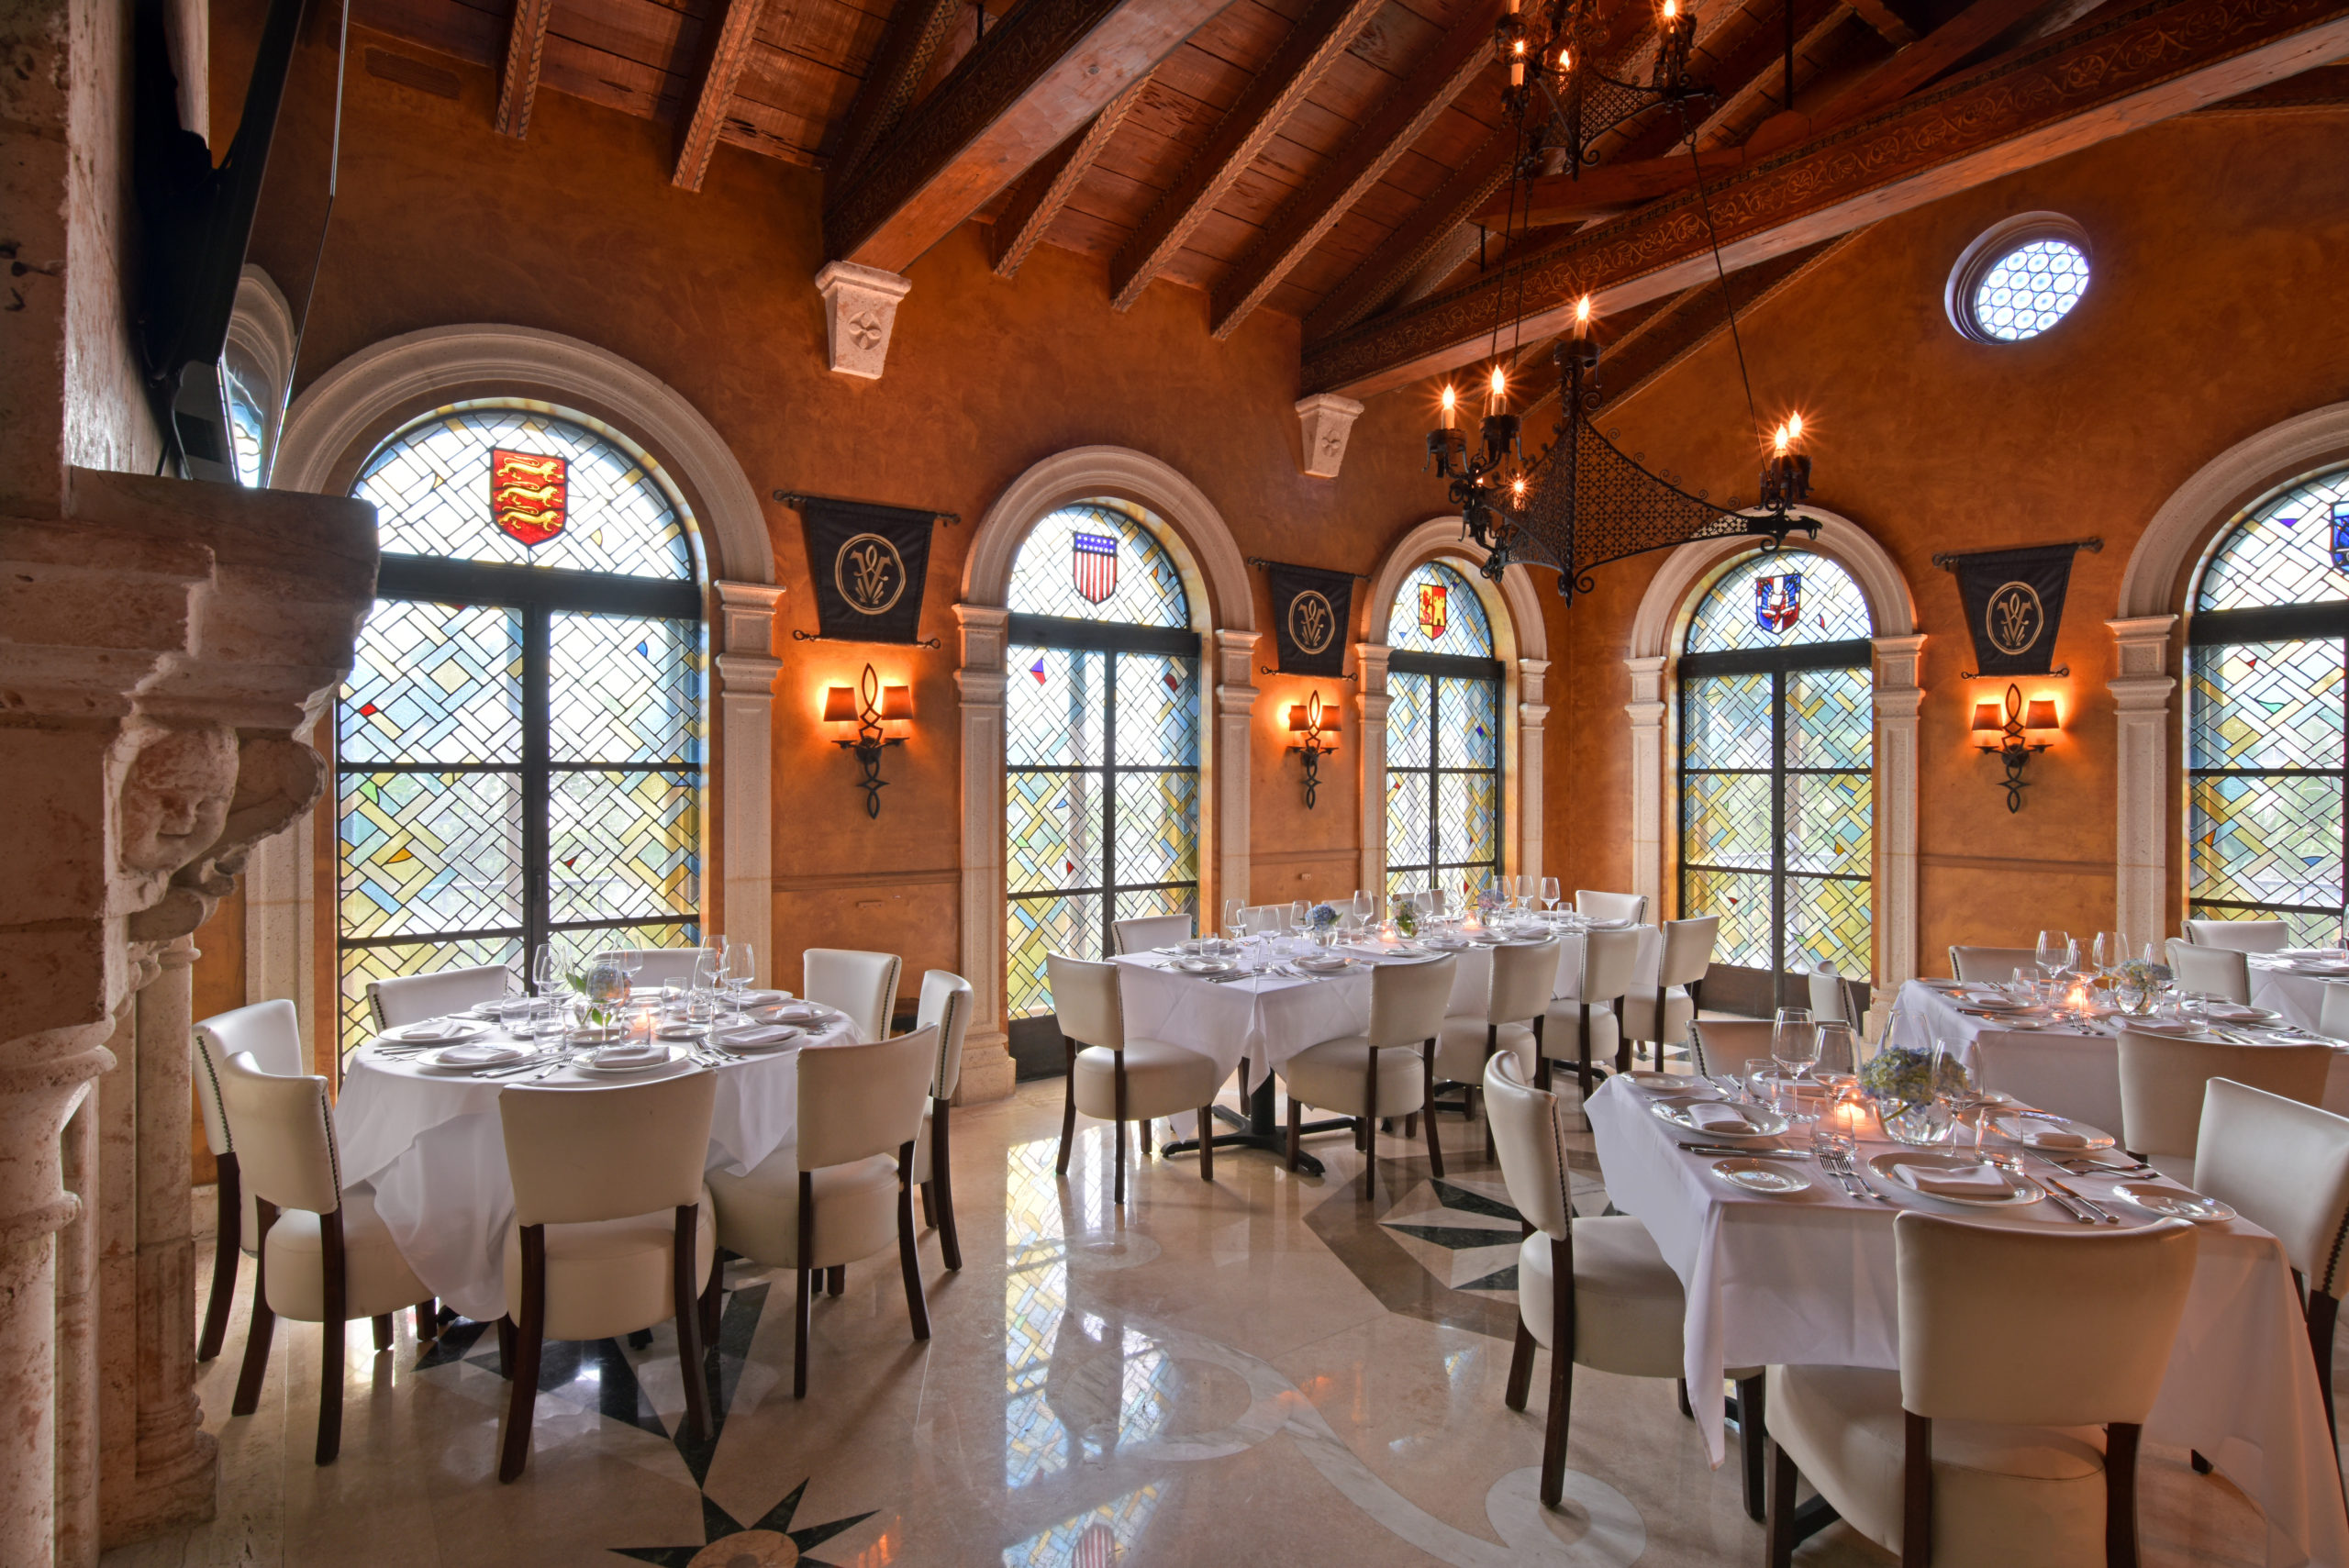 dining space with white table cloths, white chairs and arched windows with traditional style stained glass